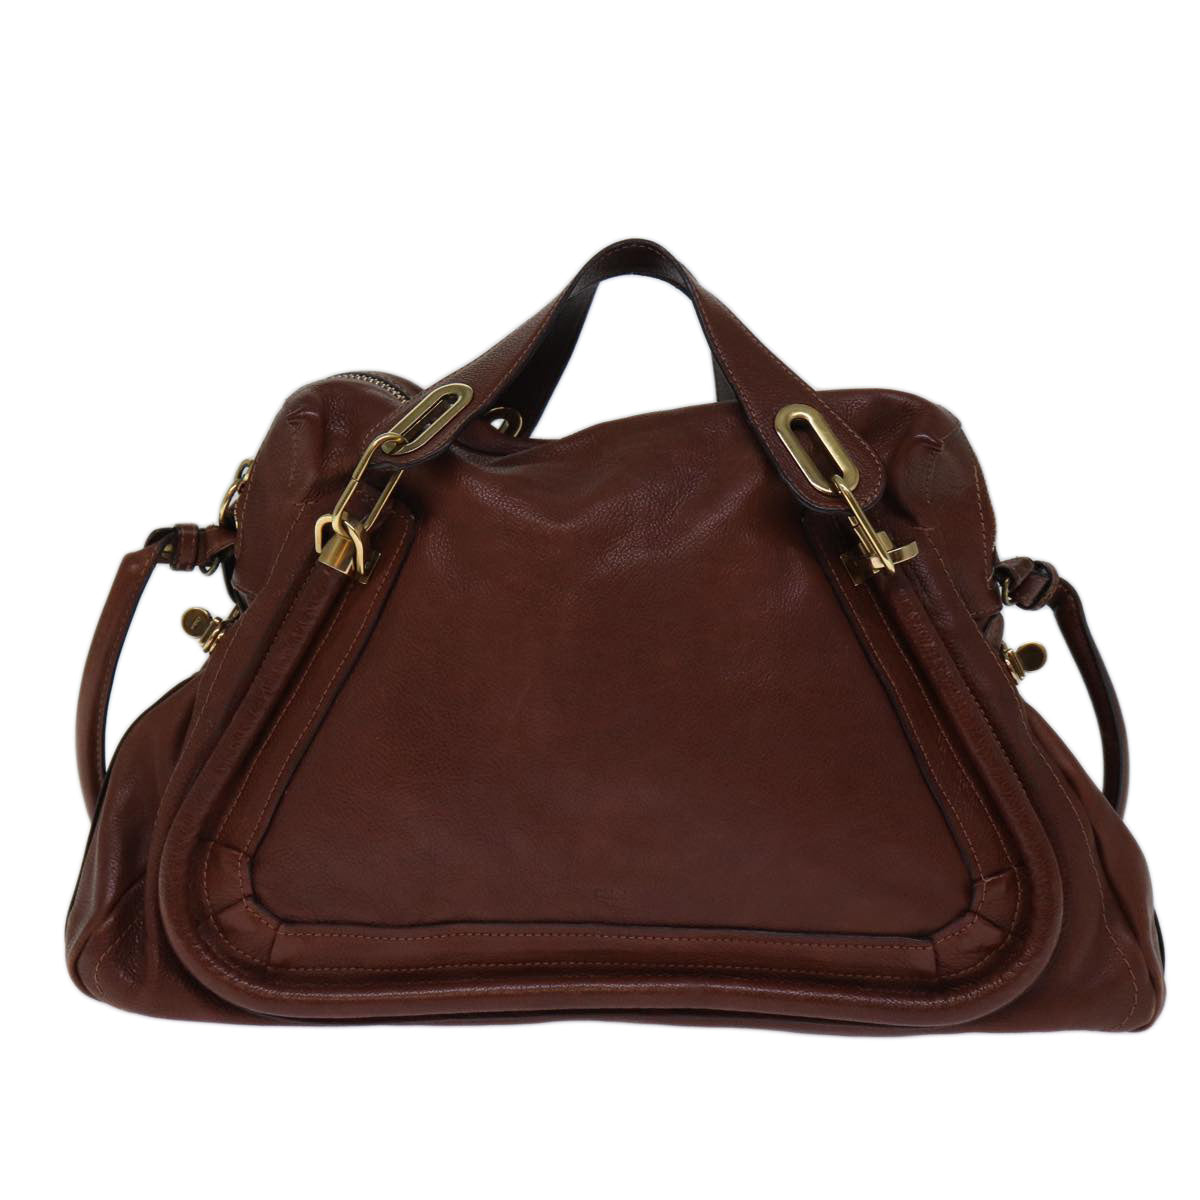 Chloe Mercy Hand Bag Leather 2way Brown Auth bs14066